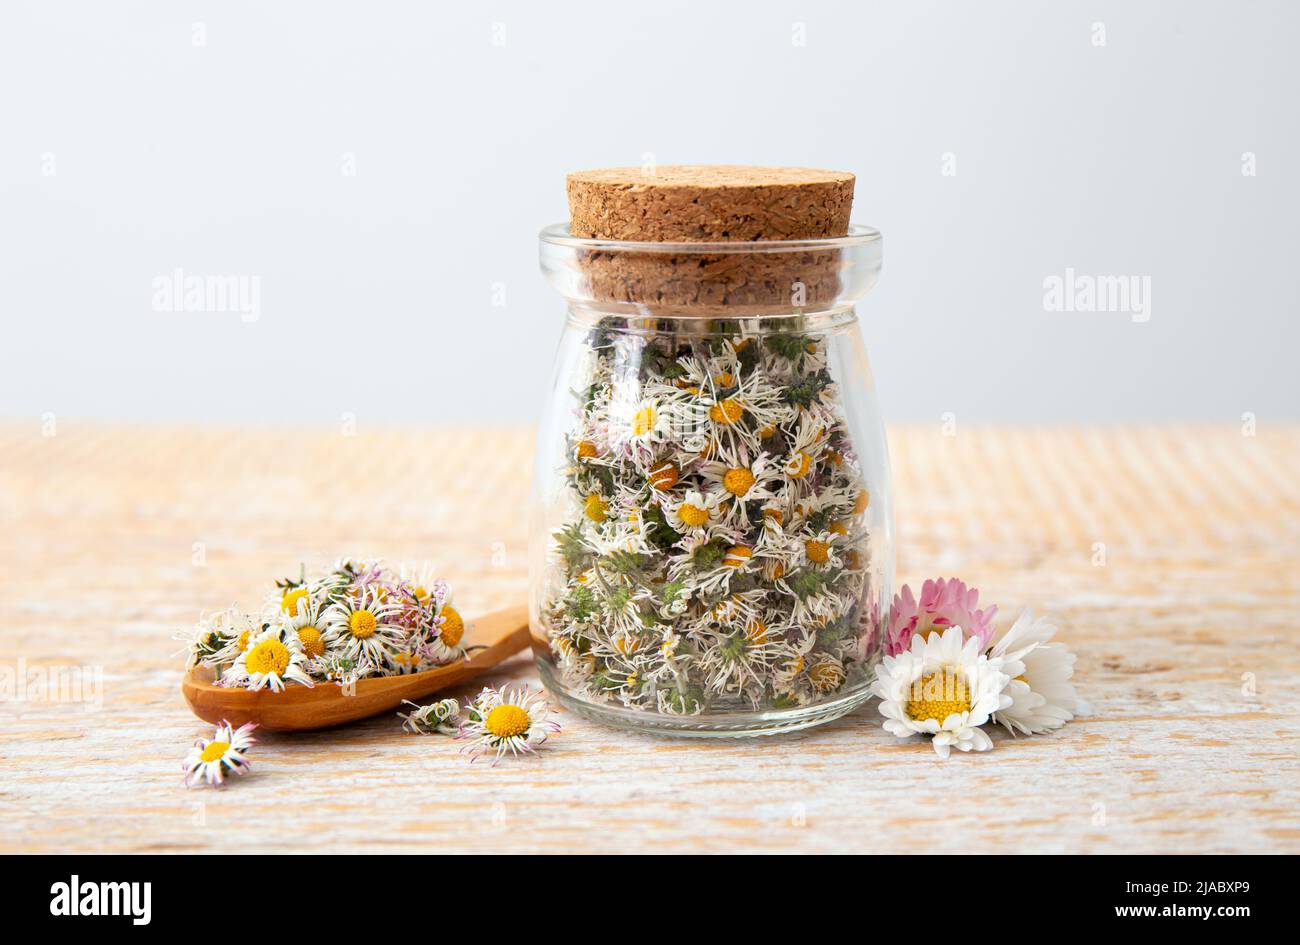 Dried herbal medicinal plant Common Daisy, also known as Bellis Perennis. Dry flower blossoms in glass jar and wood spoon, ready for making herbal tea Stock Photo